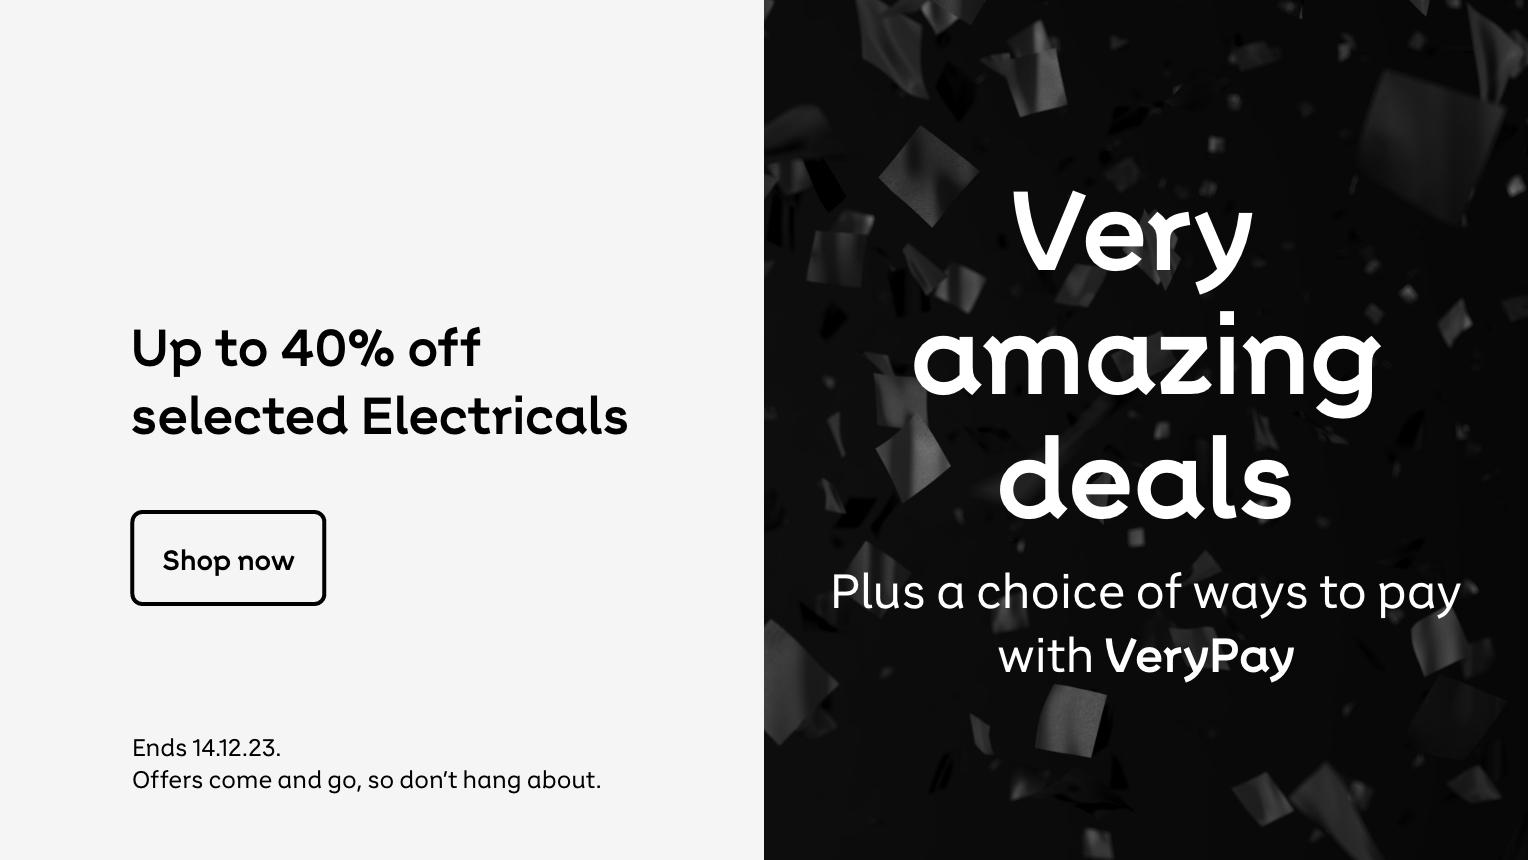 Up to 30% off selected Electricals. Shop now